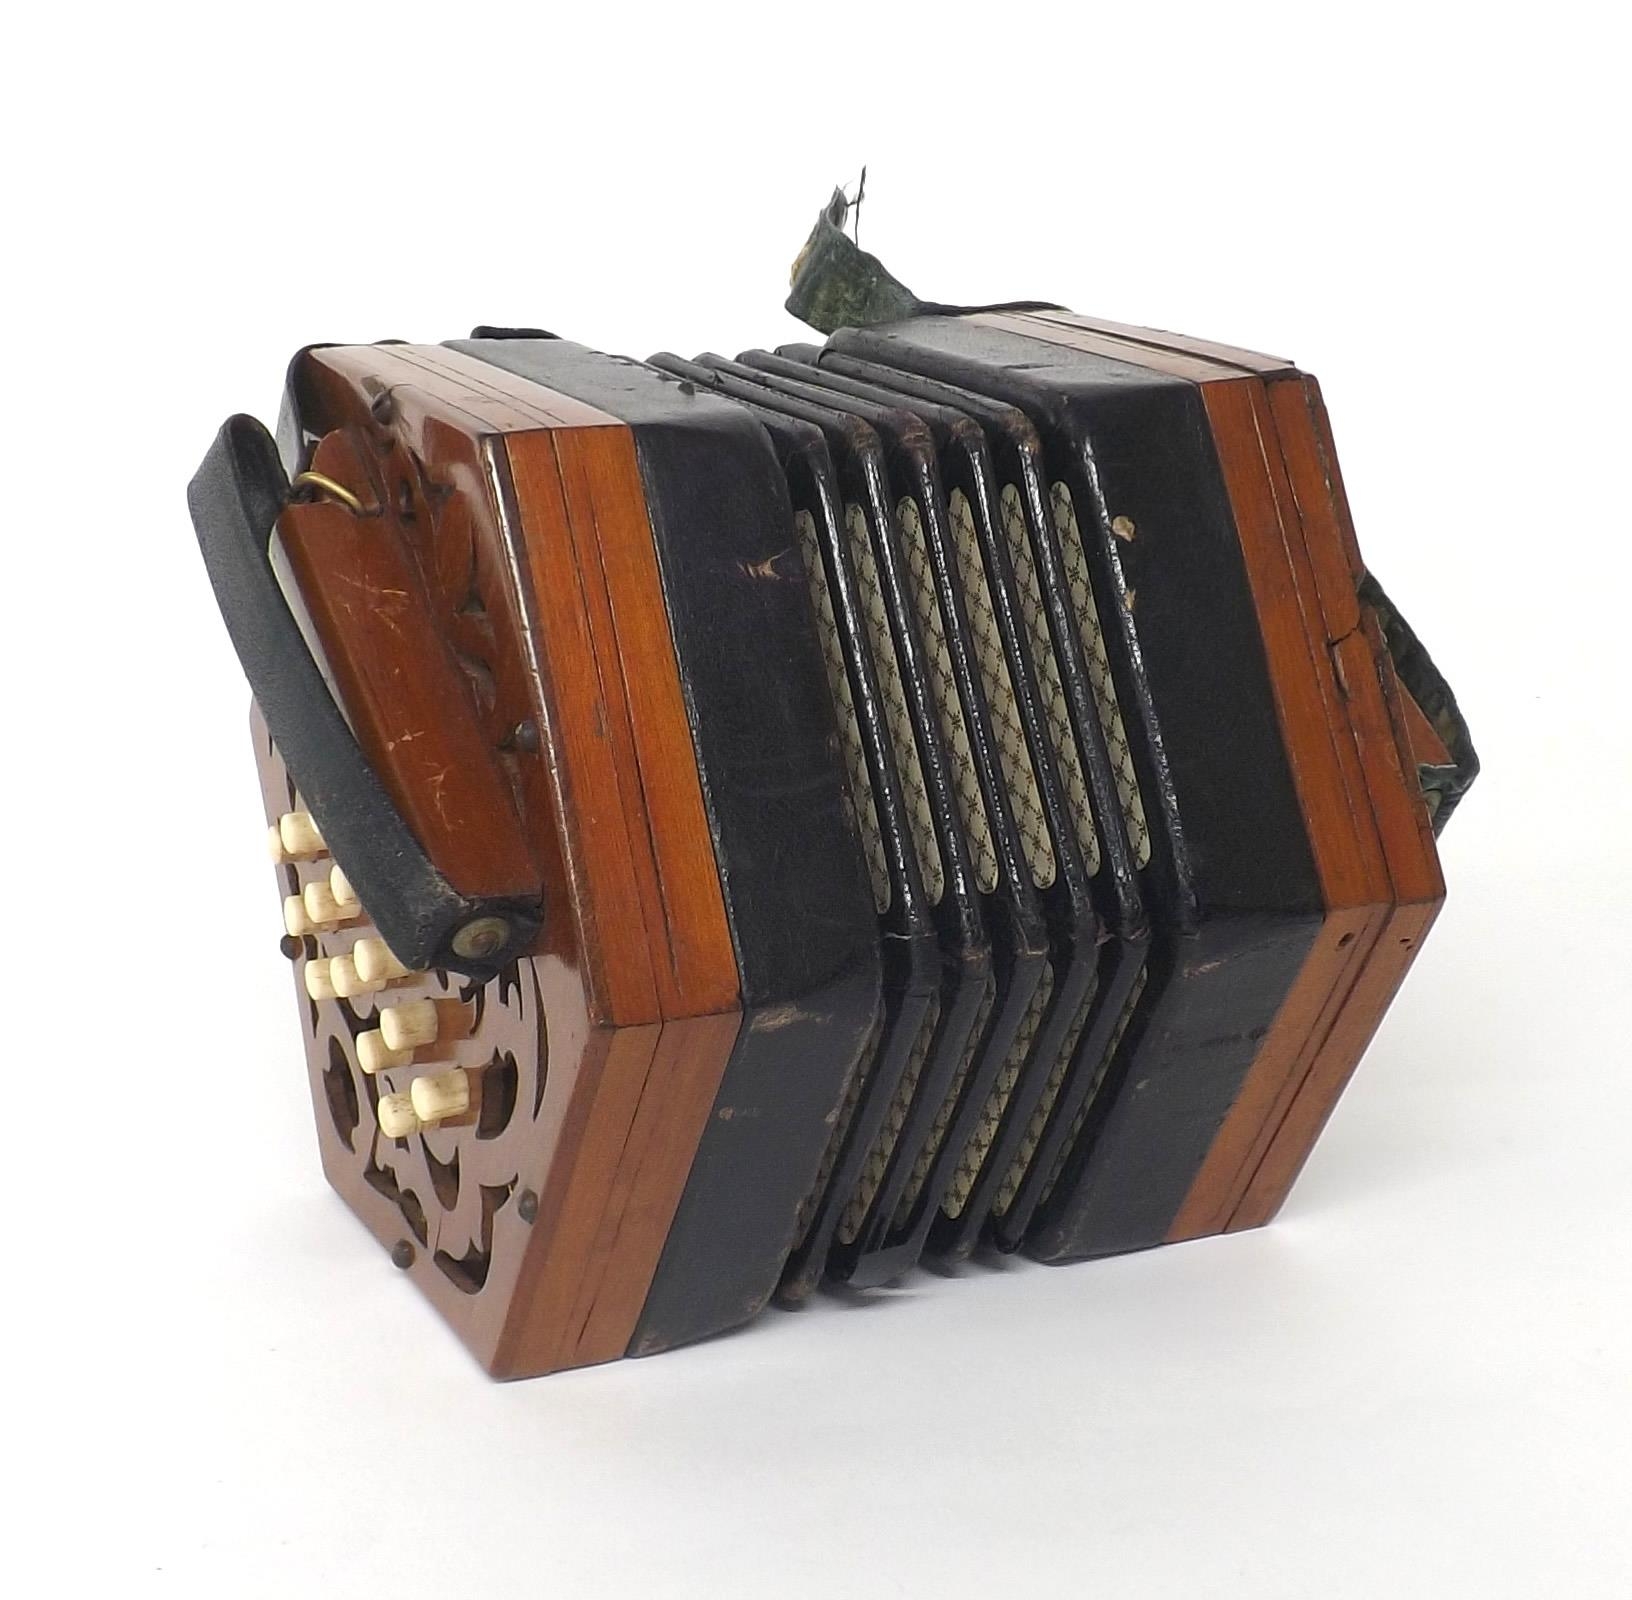 C. Jones concertina in need of restoration, with twenty-seven bone buttons on pierced mahogany ends, - Image 3 of 5